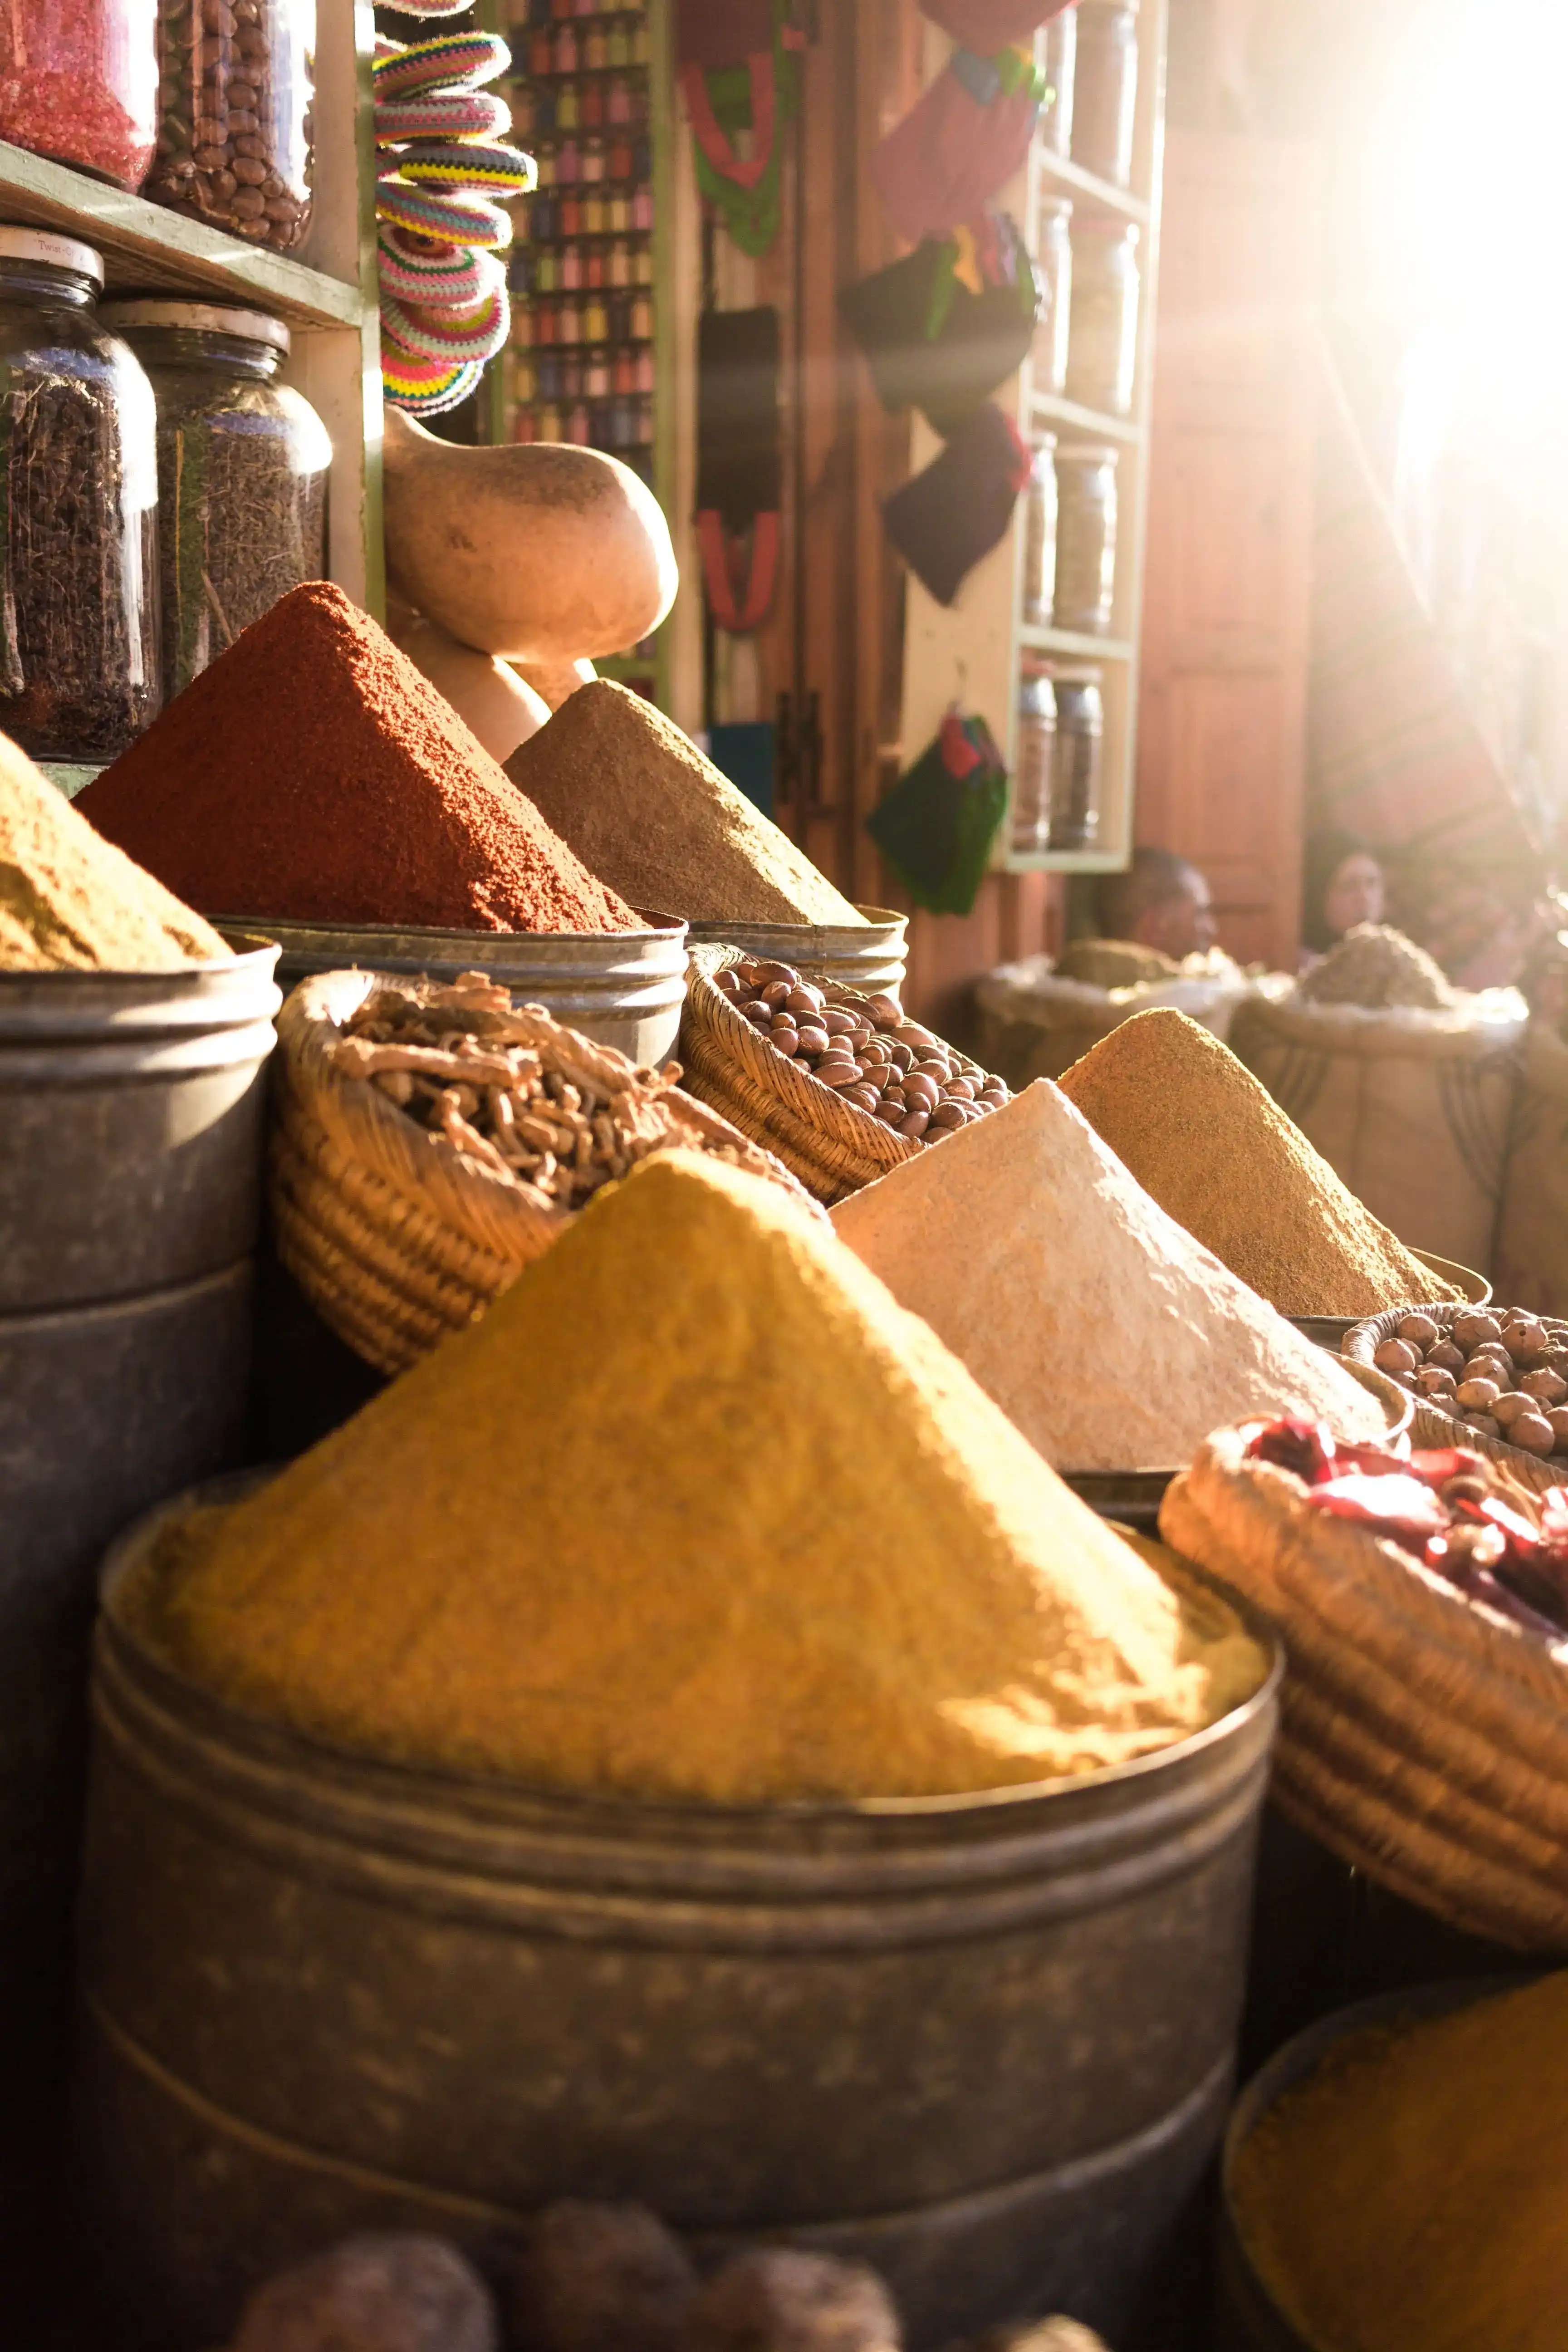 Moroccan spices in market